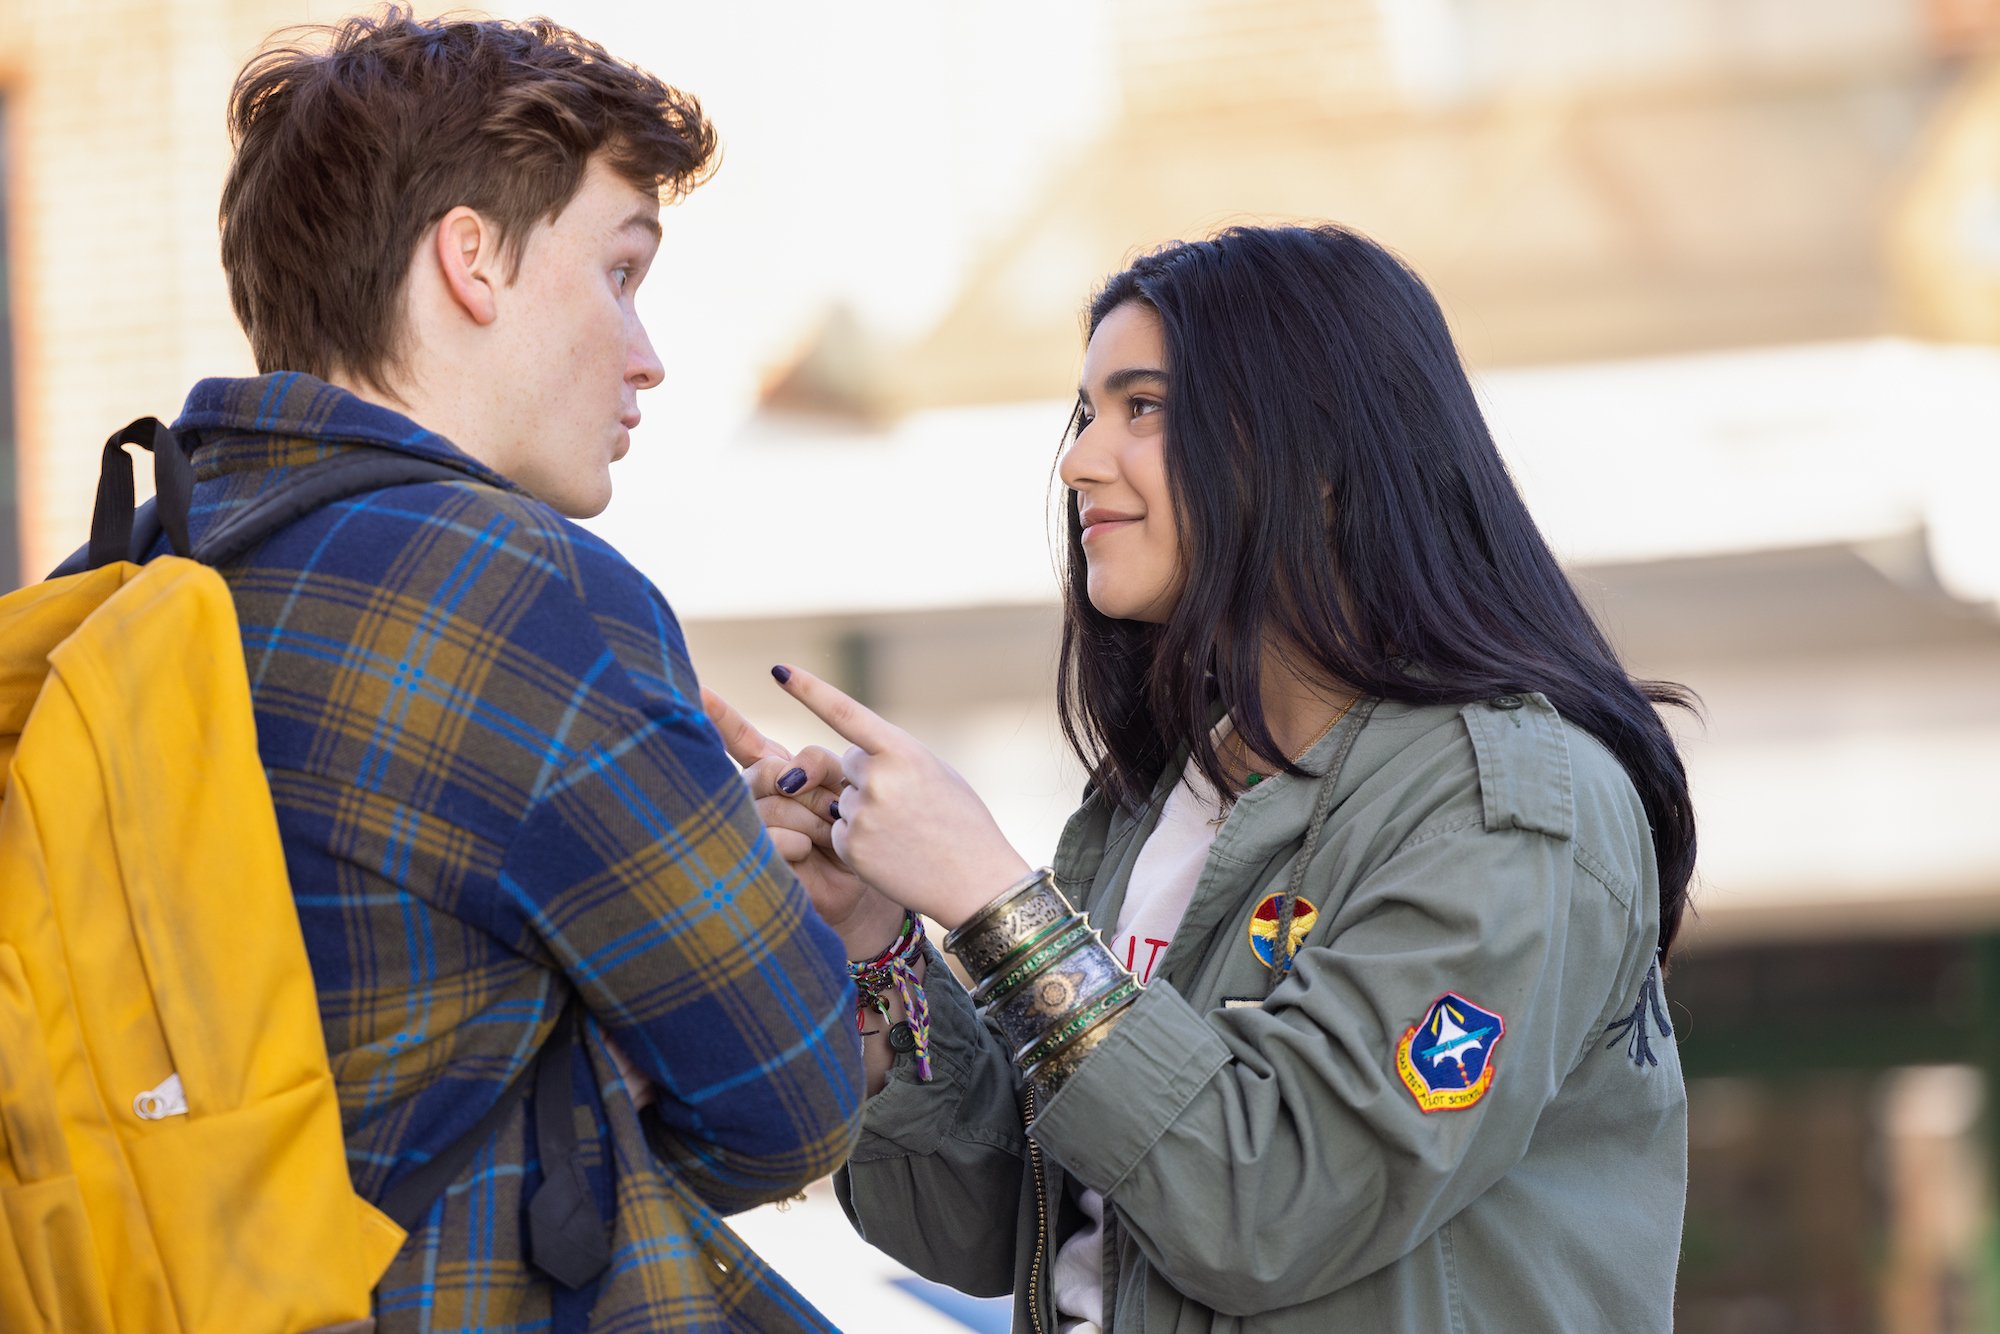 Matthew Lintz and Iman Vellani. in character as Bruno and Kamala, share a scene in 'Ms. Marvel' Episode 2.